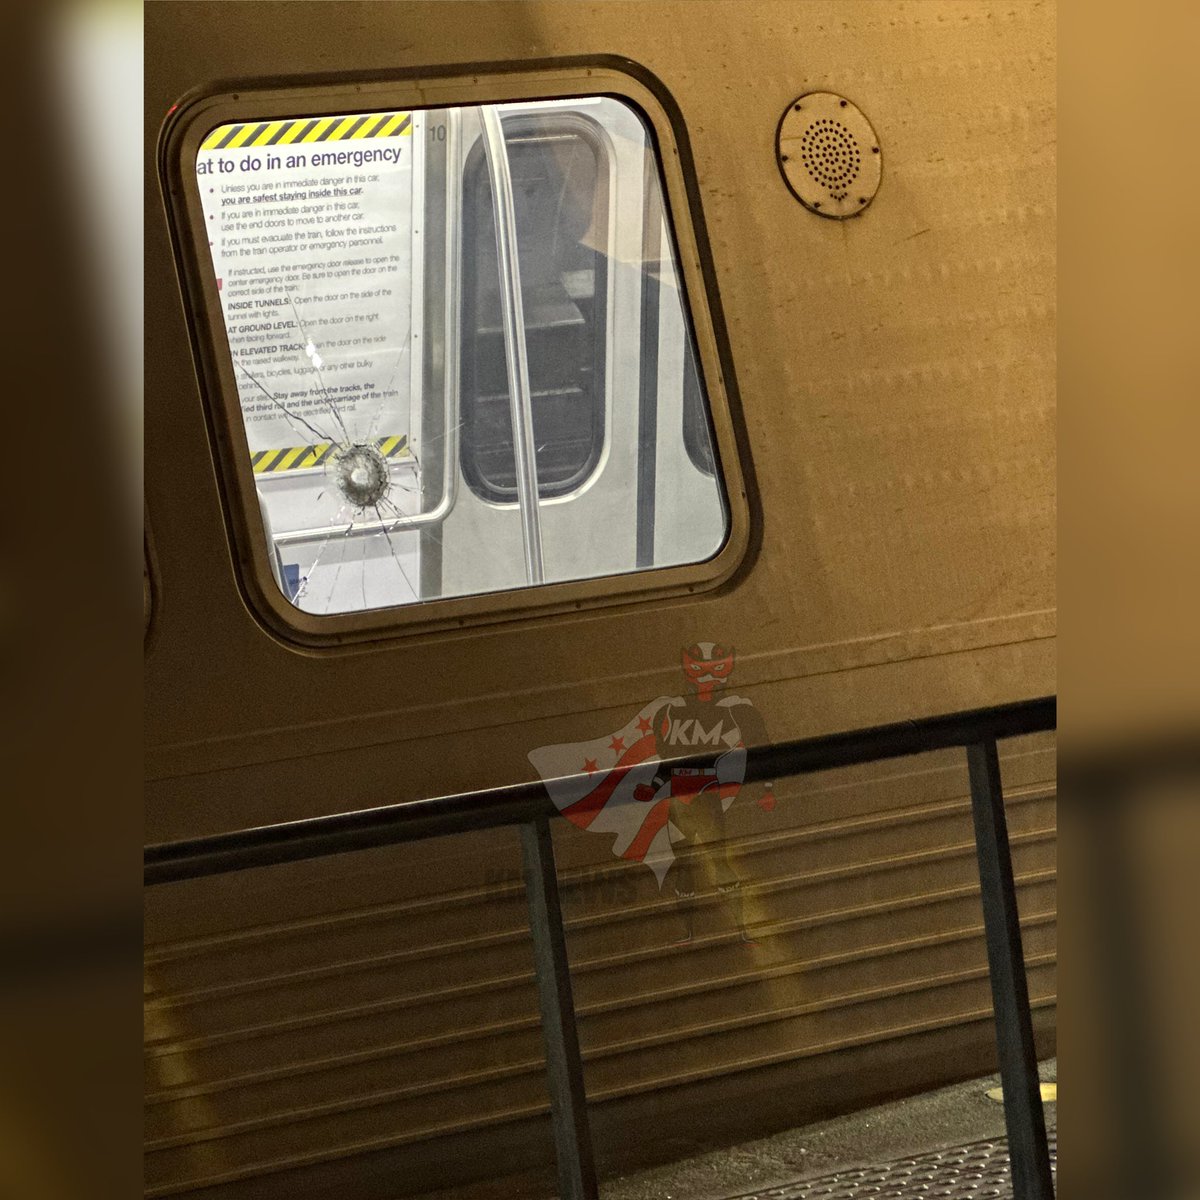 SHOOTING: Potomac Ave Metro station: Metro Transit is on the scene of a shooting with a shot fired going through the window of a train. Nobody was injured and they may have one person detained on a silver line train at another station